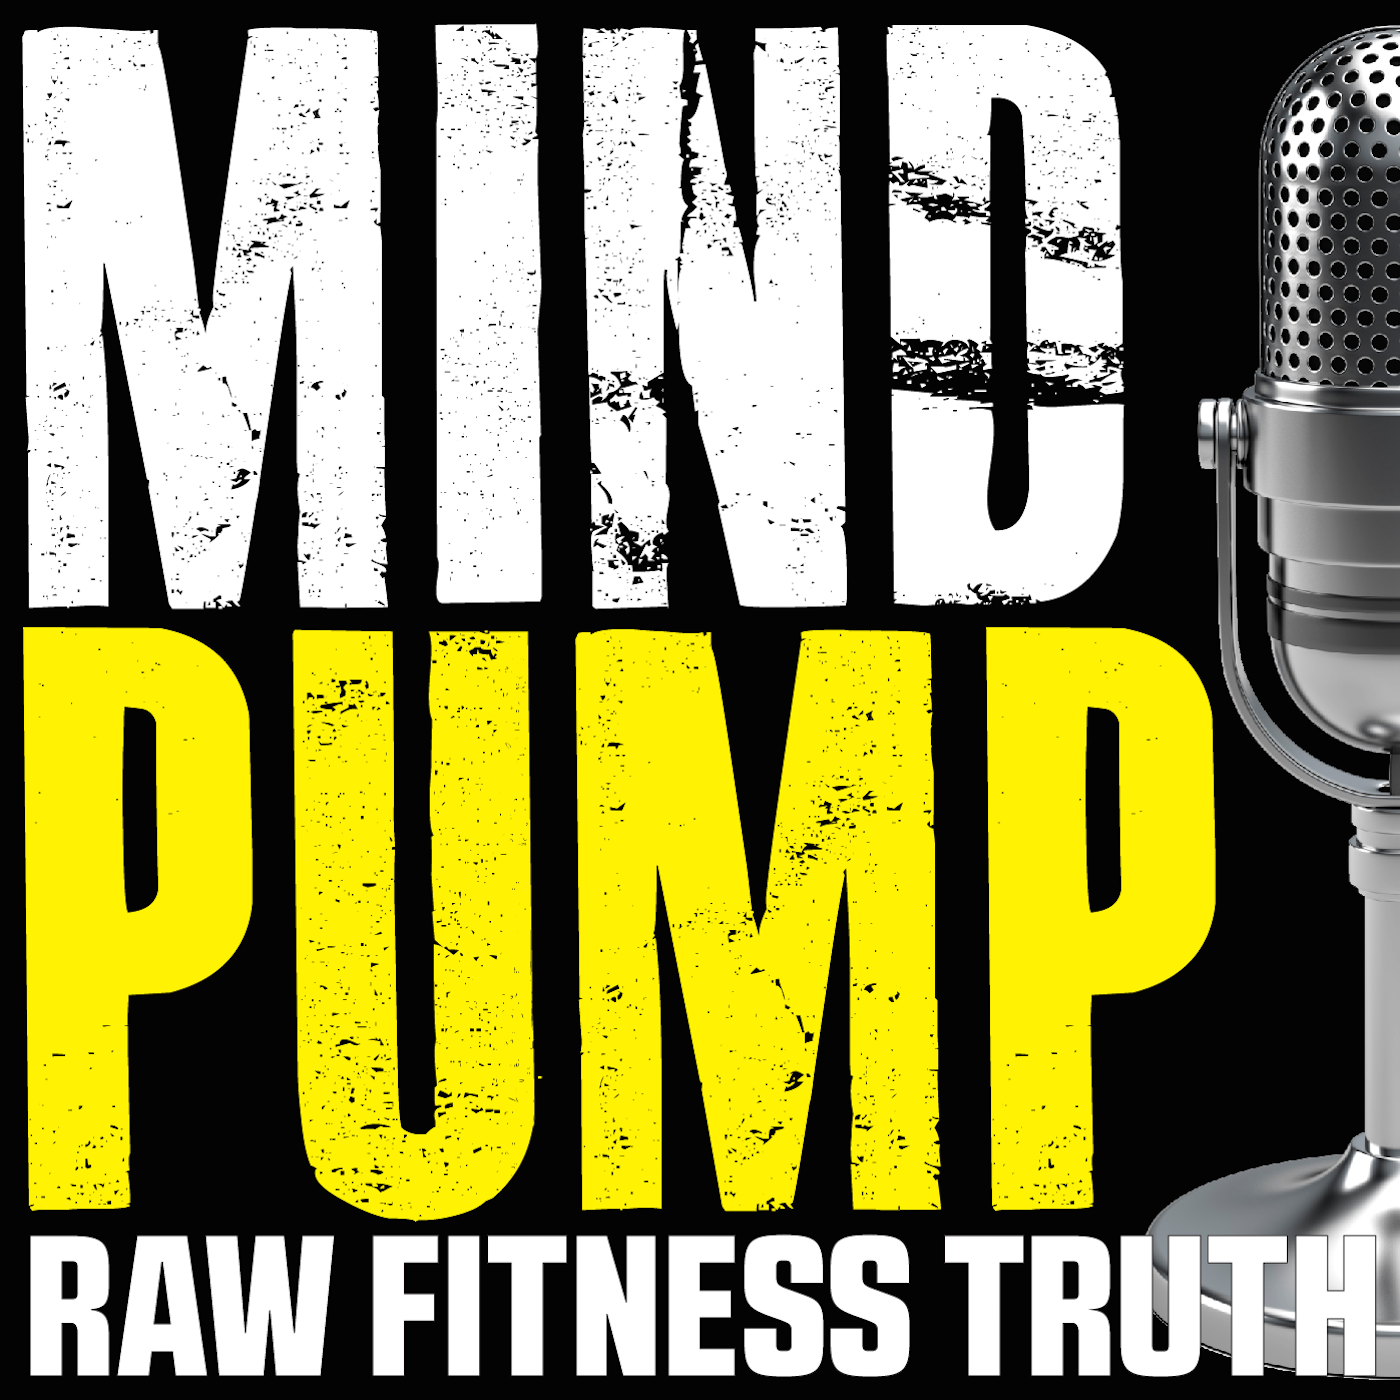 061: Equipping a home gym, gluten, juicing and more…